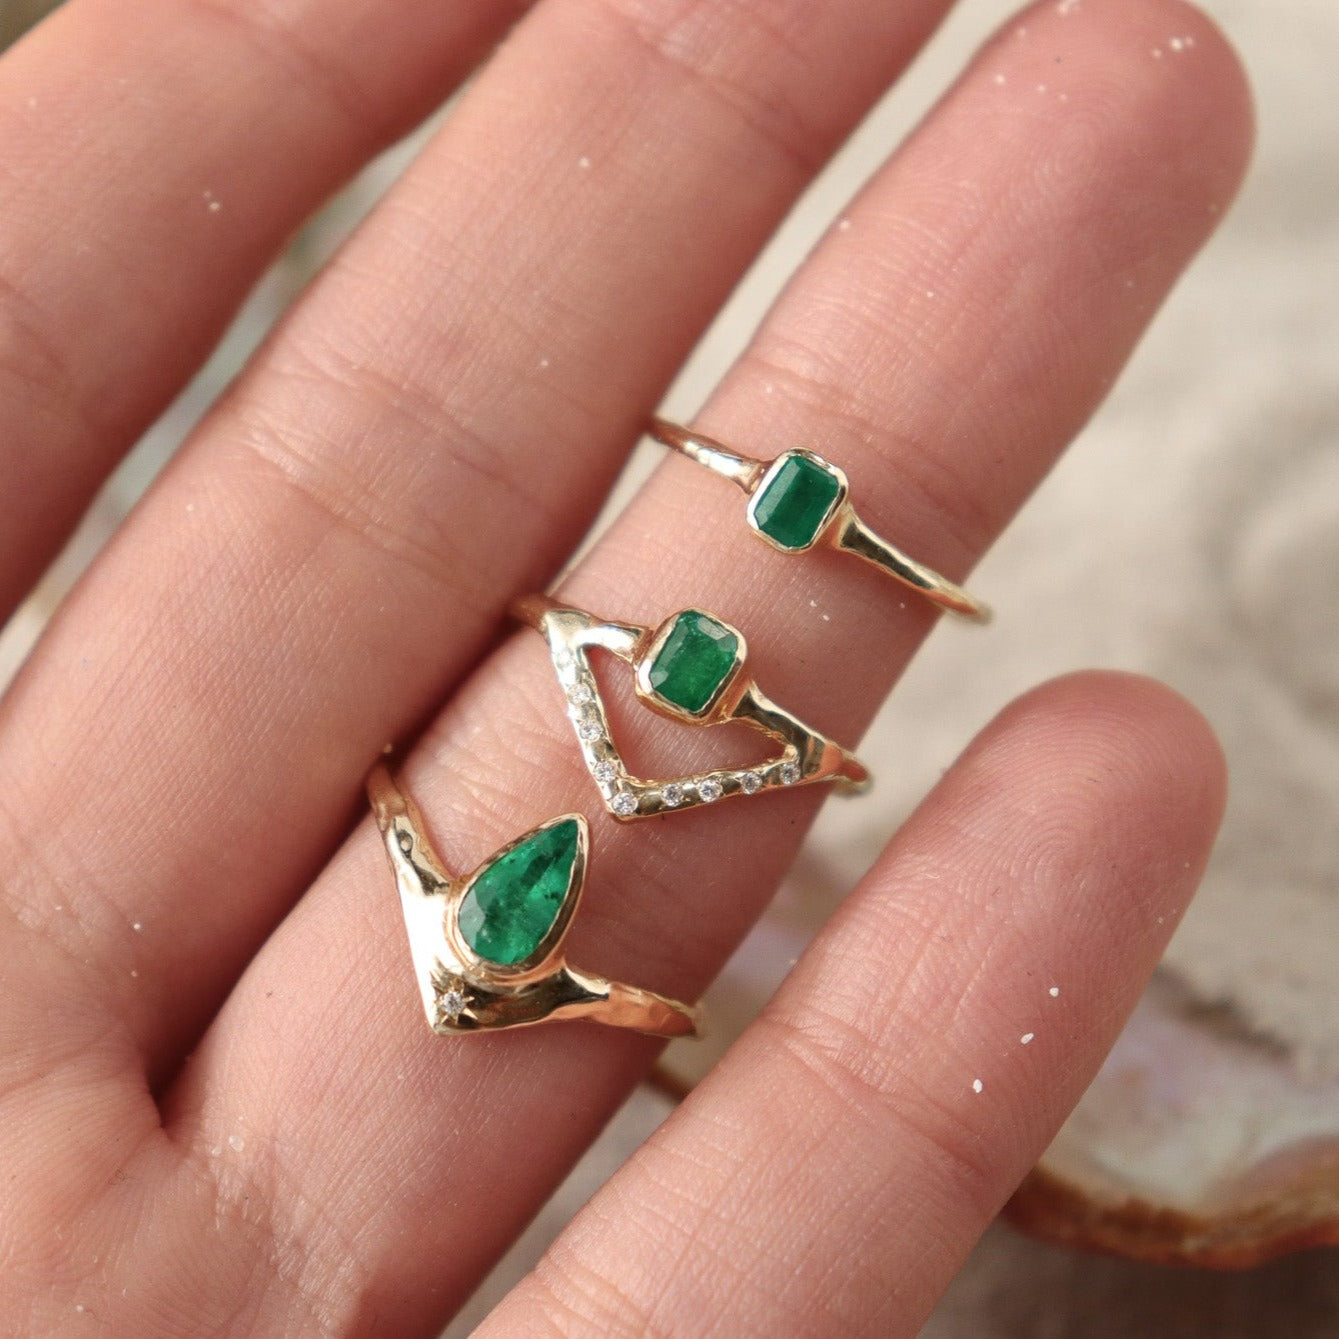 Stunning emerald ring with a bezel-set, rich green gemstone elegantly perched on a delicate, narrow band. Beneath it, a gracefully designed V-band features organically set diamonds, adding a touch of nature-inspired luxury to your jewelry collection. Shown next to two other emerald rings for comparison. 